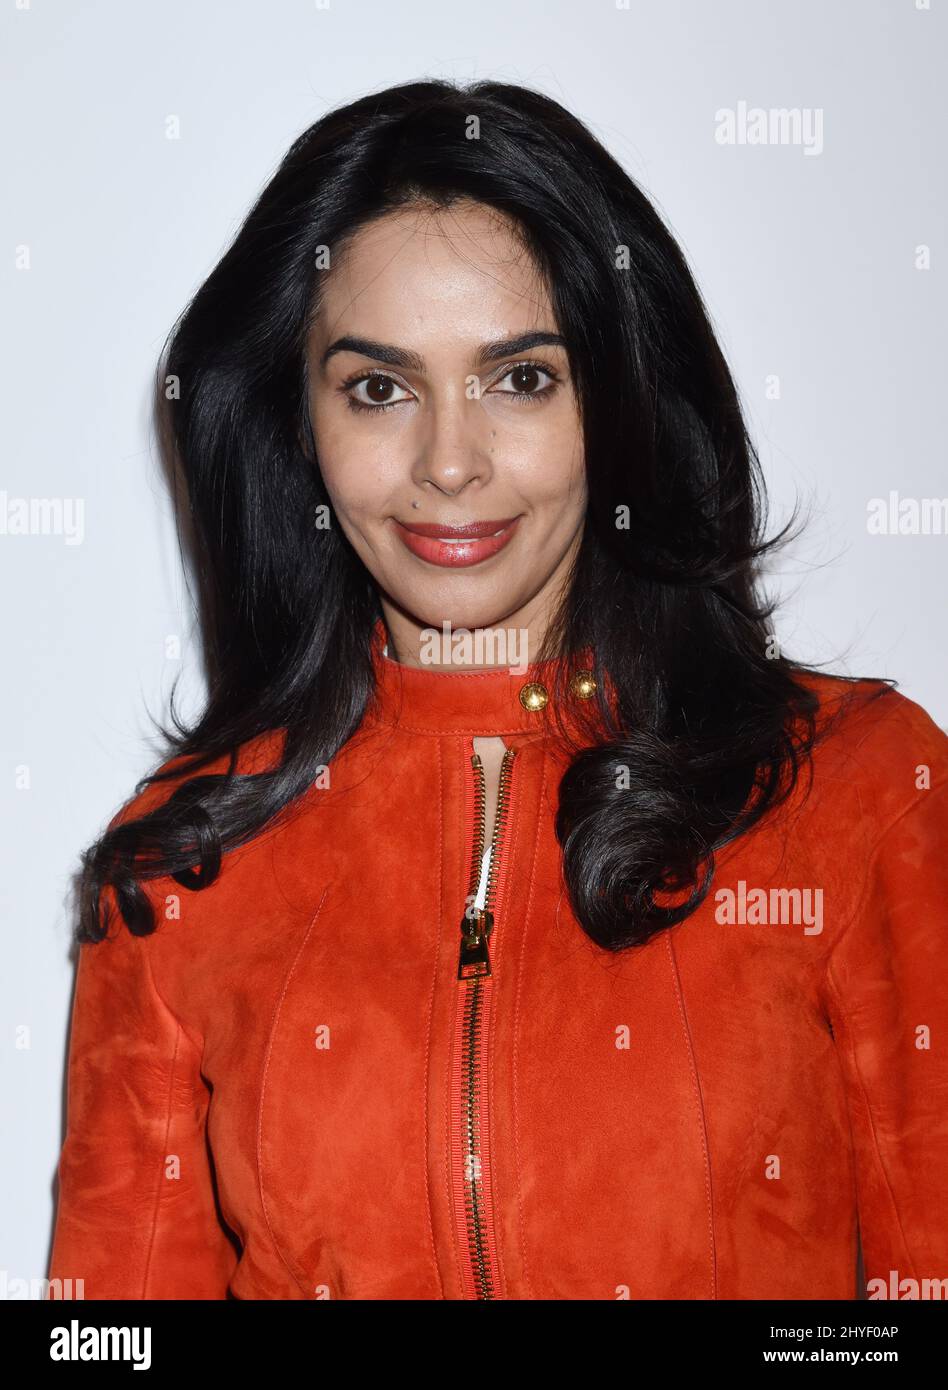 Mallika Sherawat attending The Final Portrait Los Angeles Special Screening held at the Pacific Design Centre in West Hollywood, Ca. Stock Photo